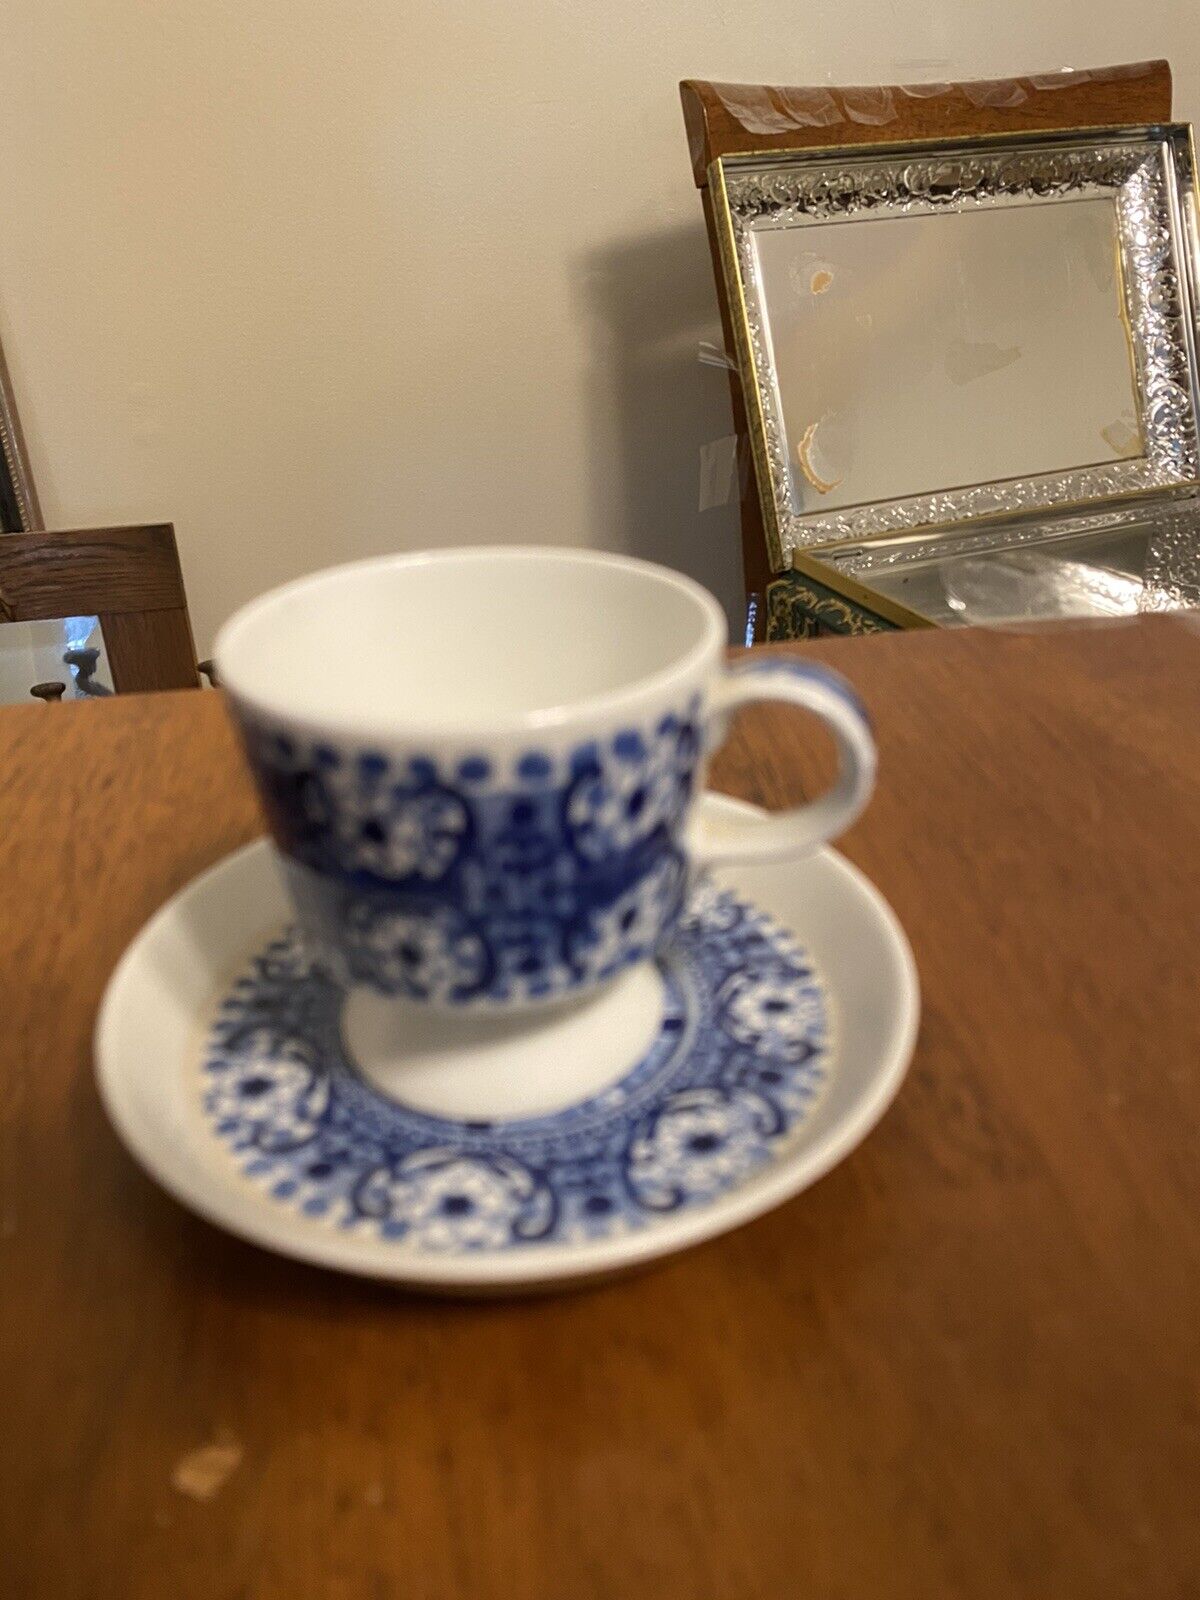 Read more about the article Vintage ARABIA Finland Demitasse Ali Blue And White Kij Franck Teacup And Saucer